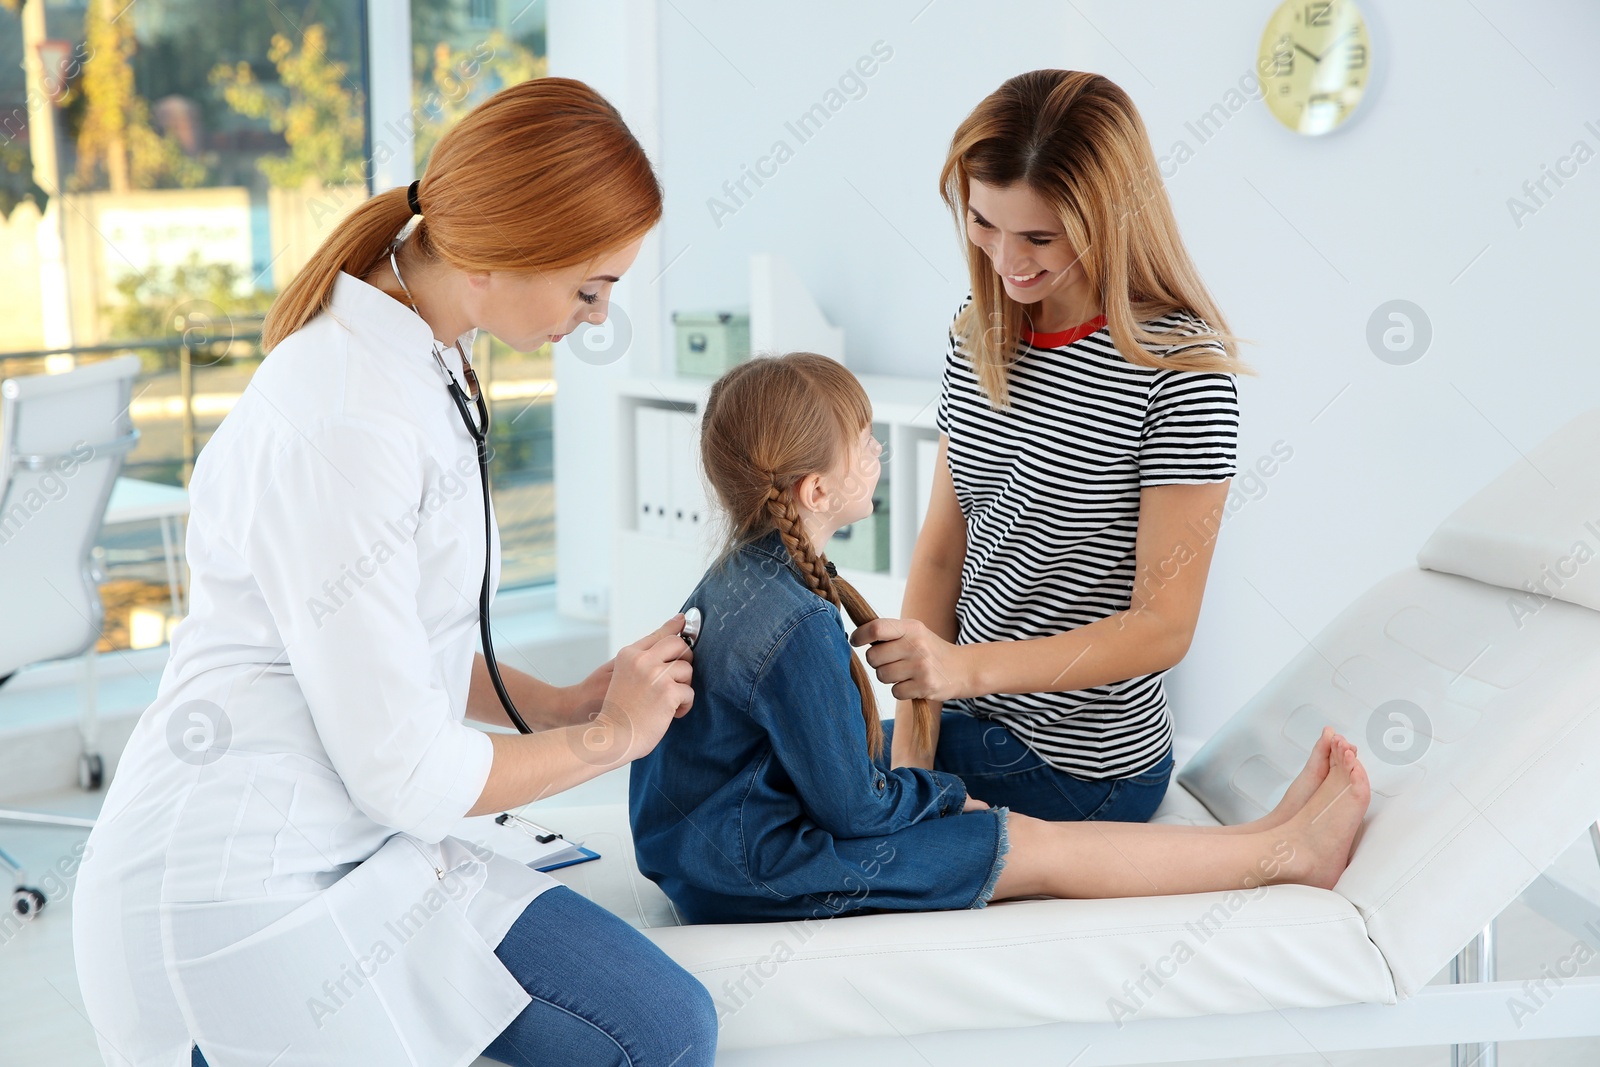 Photo of Children's doctor examining patient with stethoscope in hospital